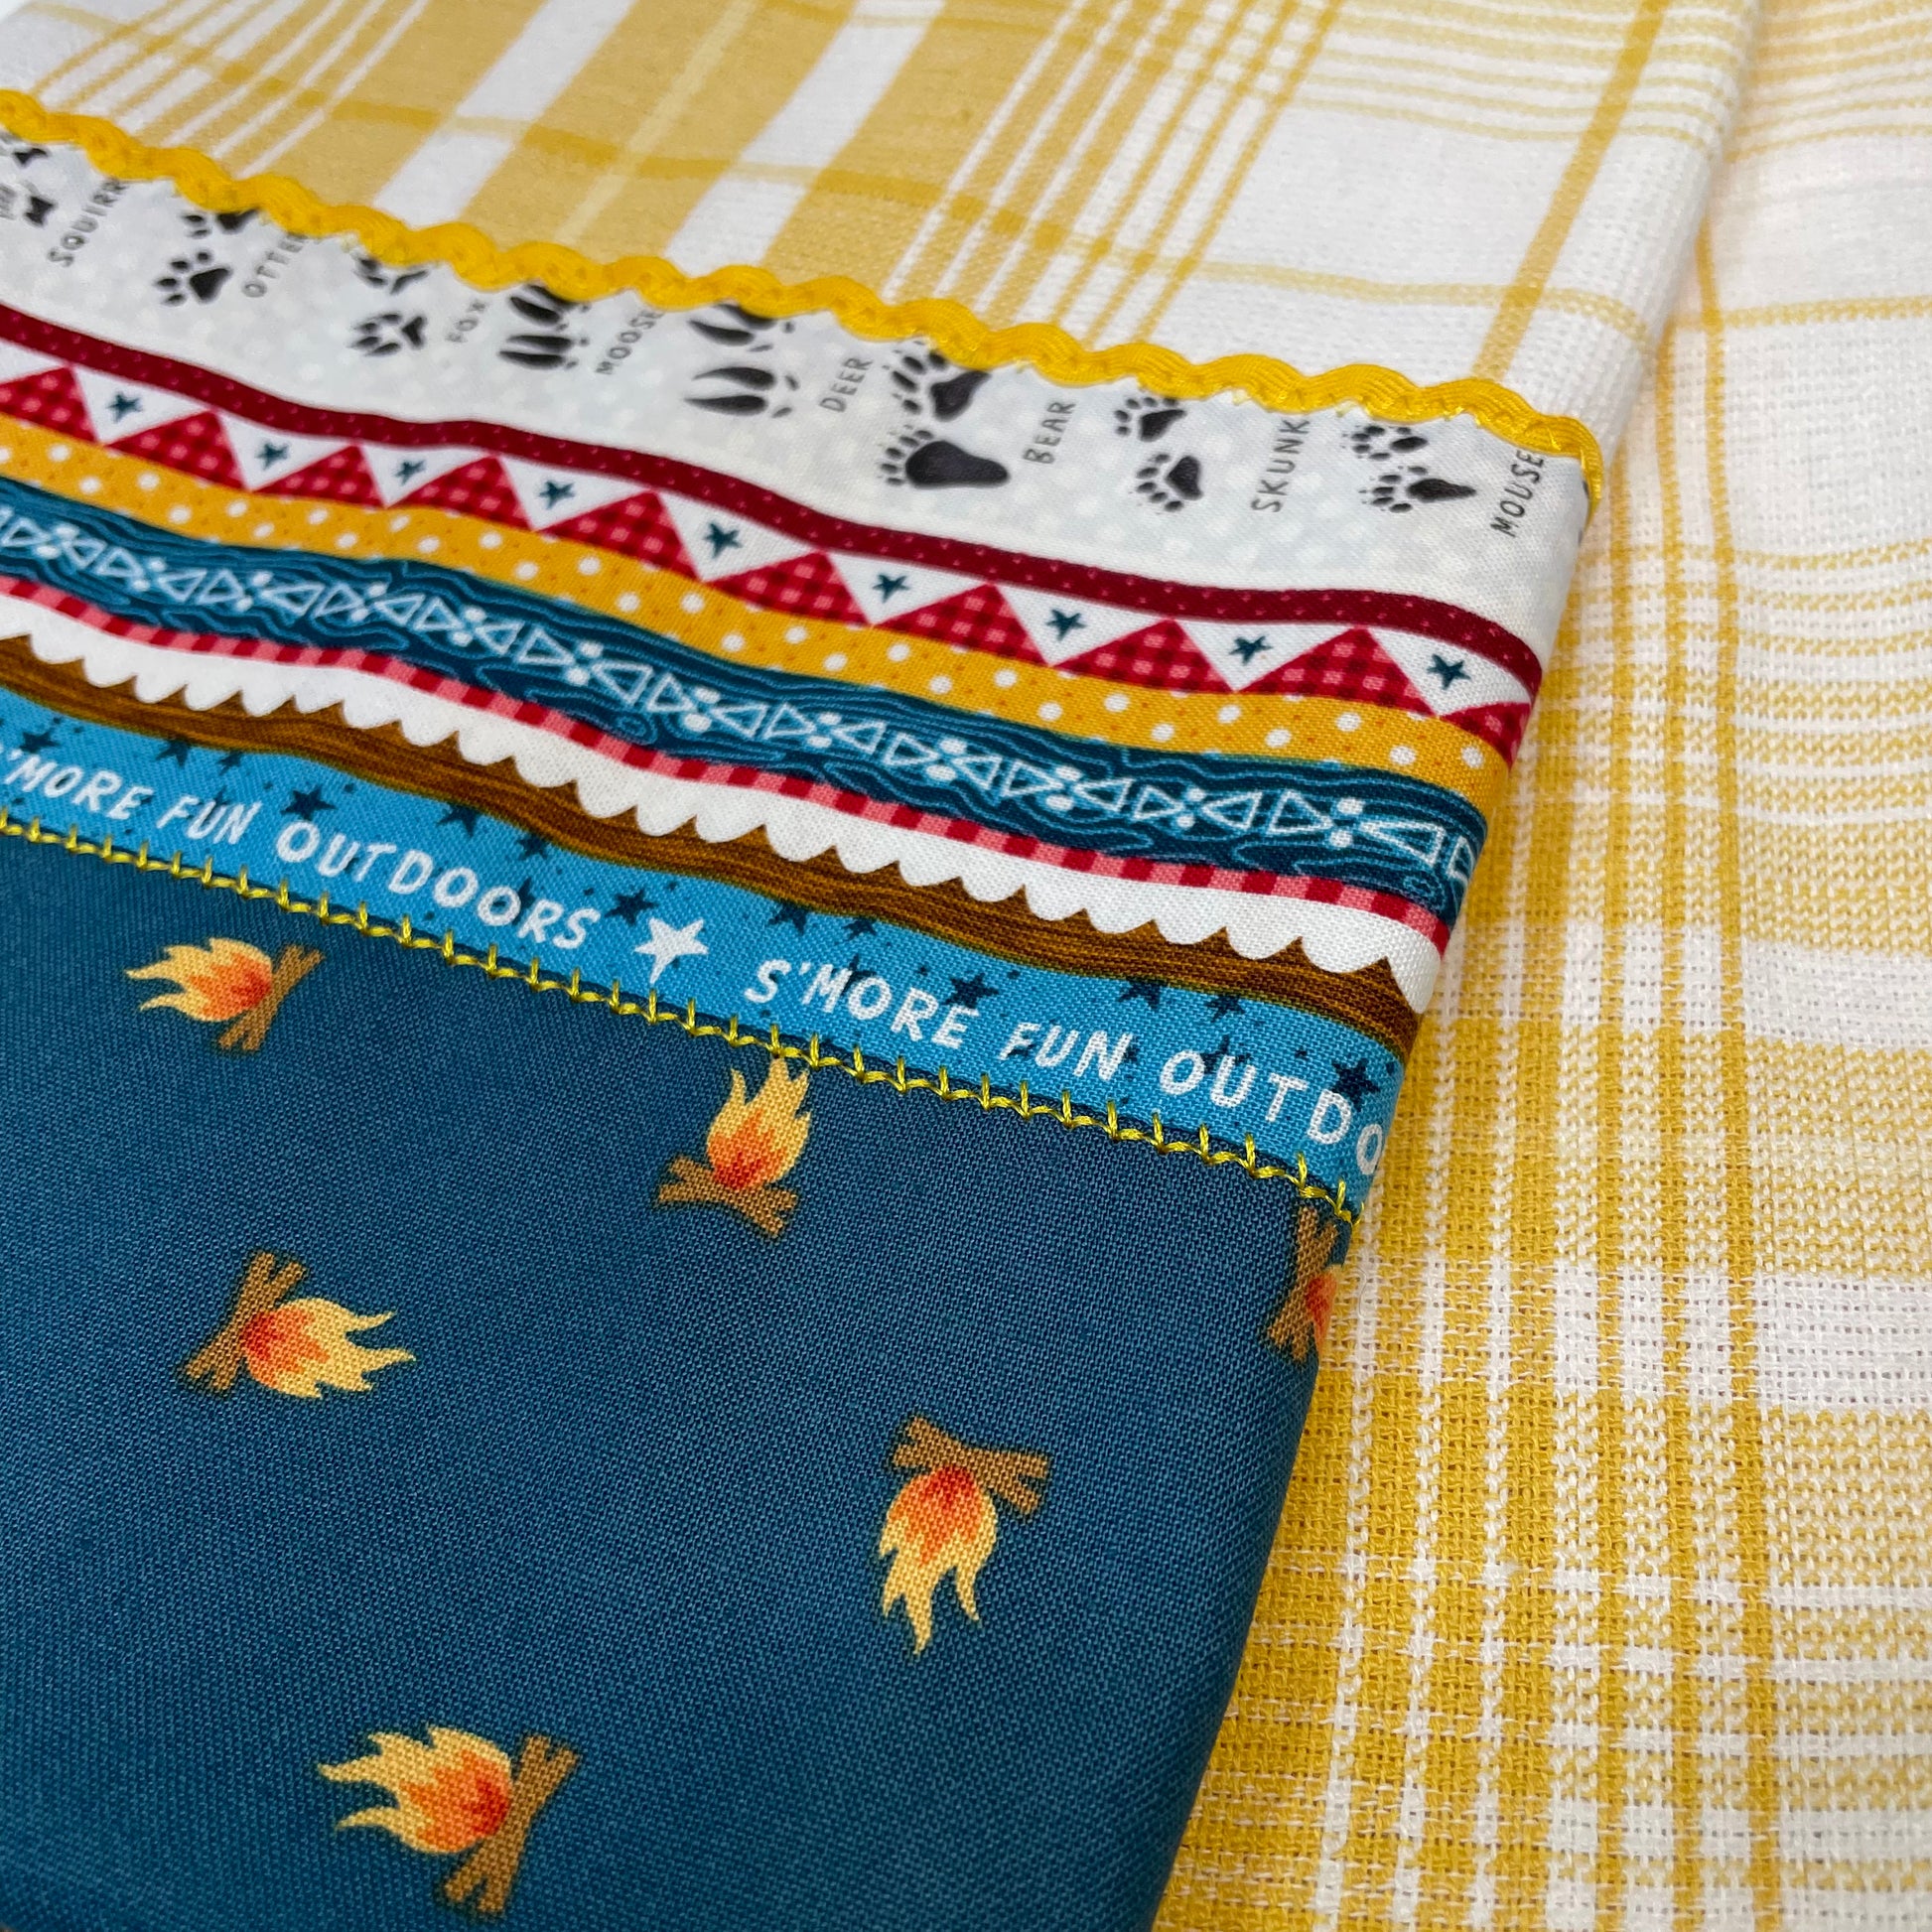 Yellow and Teal Glamping Tea Towel. Cute camping themed mix and match decor. Shop the entire collection and follow along on the Home Stitchery Decor YouTube Channel.